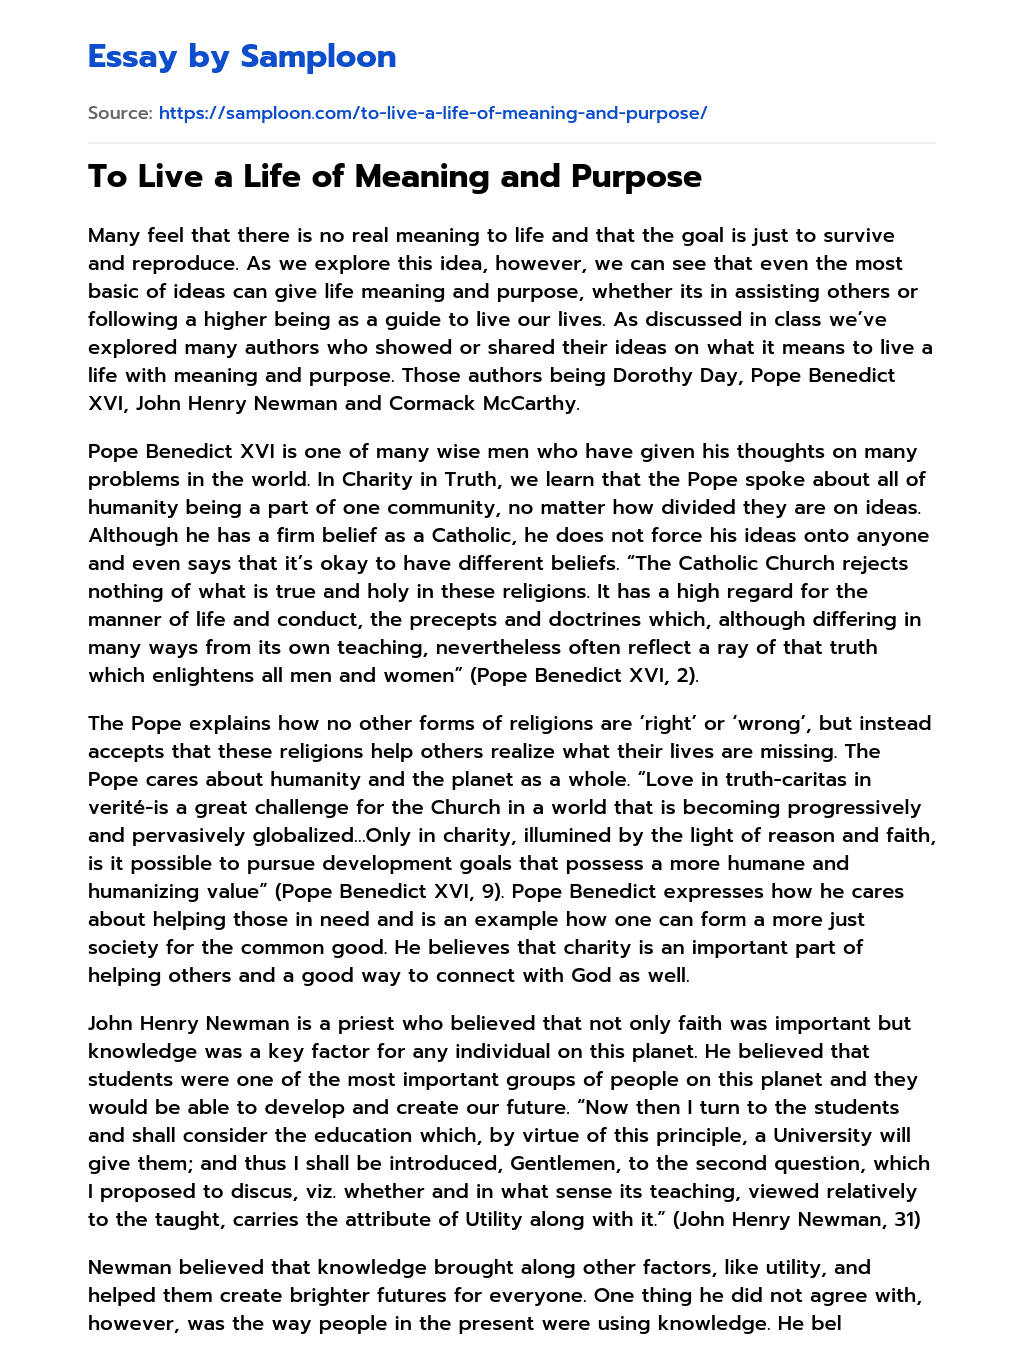 essay about what is the meaning of life